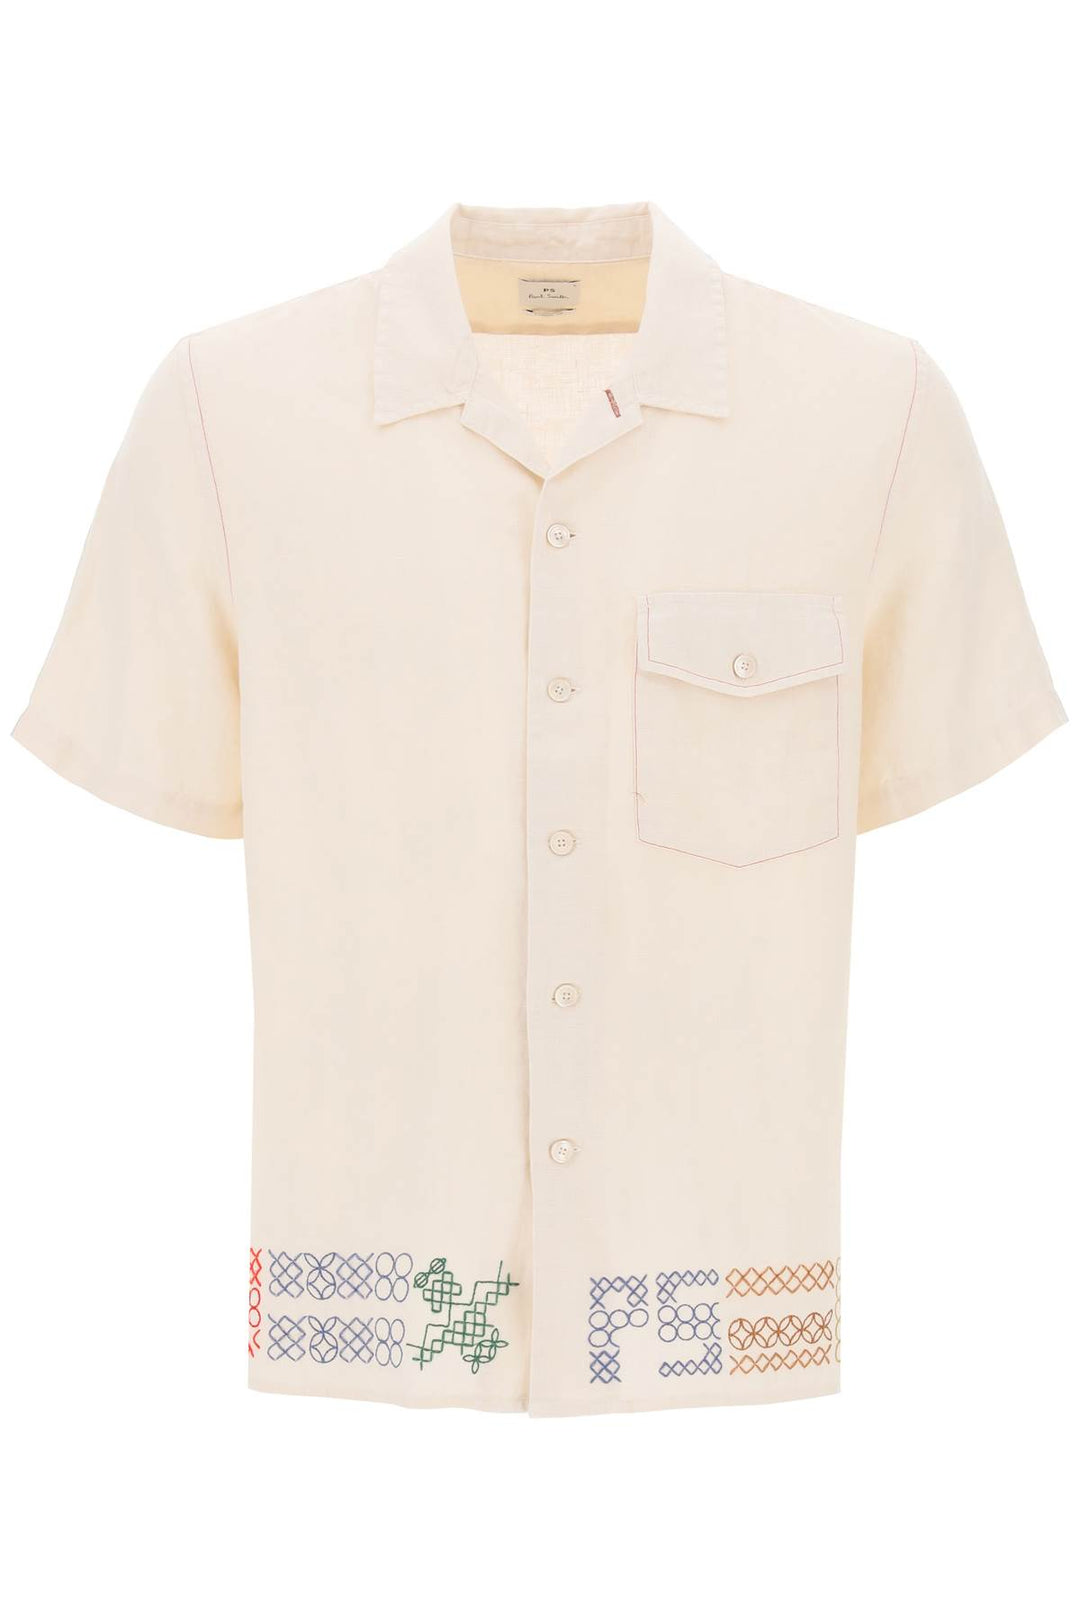 Ps Paul Smith Bowling Shirt With Cross Stitch Embroidery Details   Beige